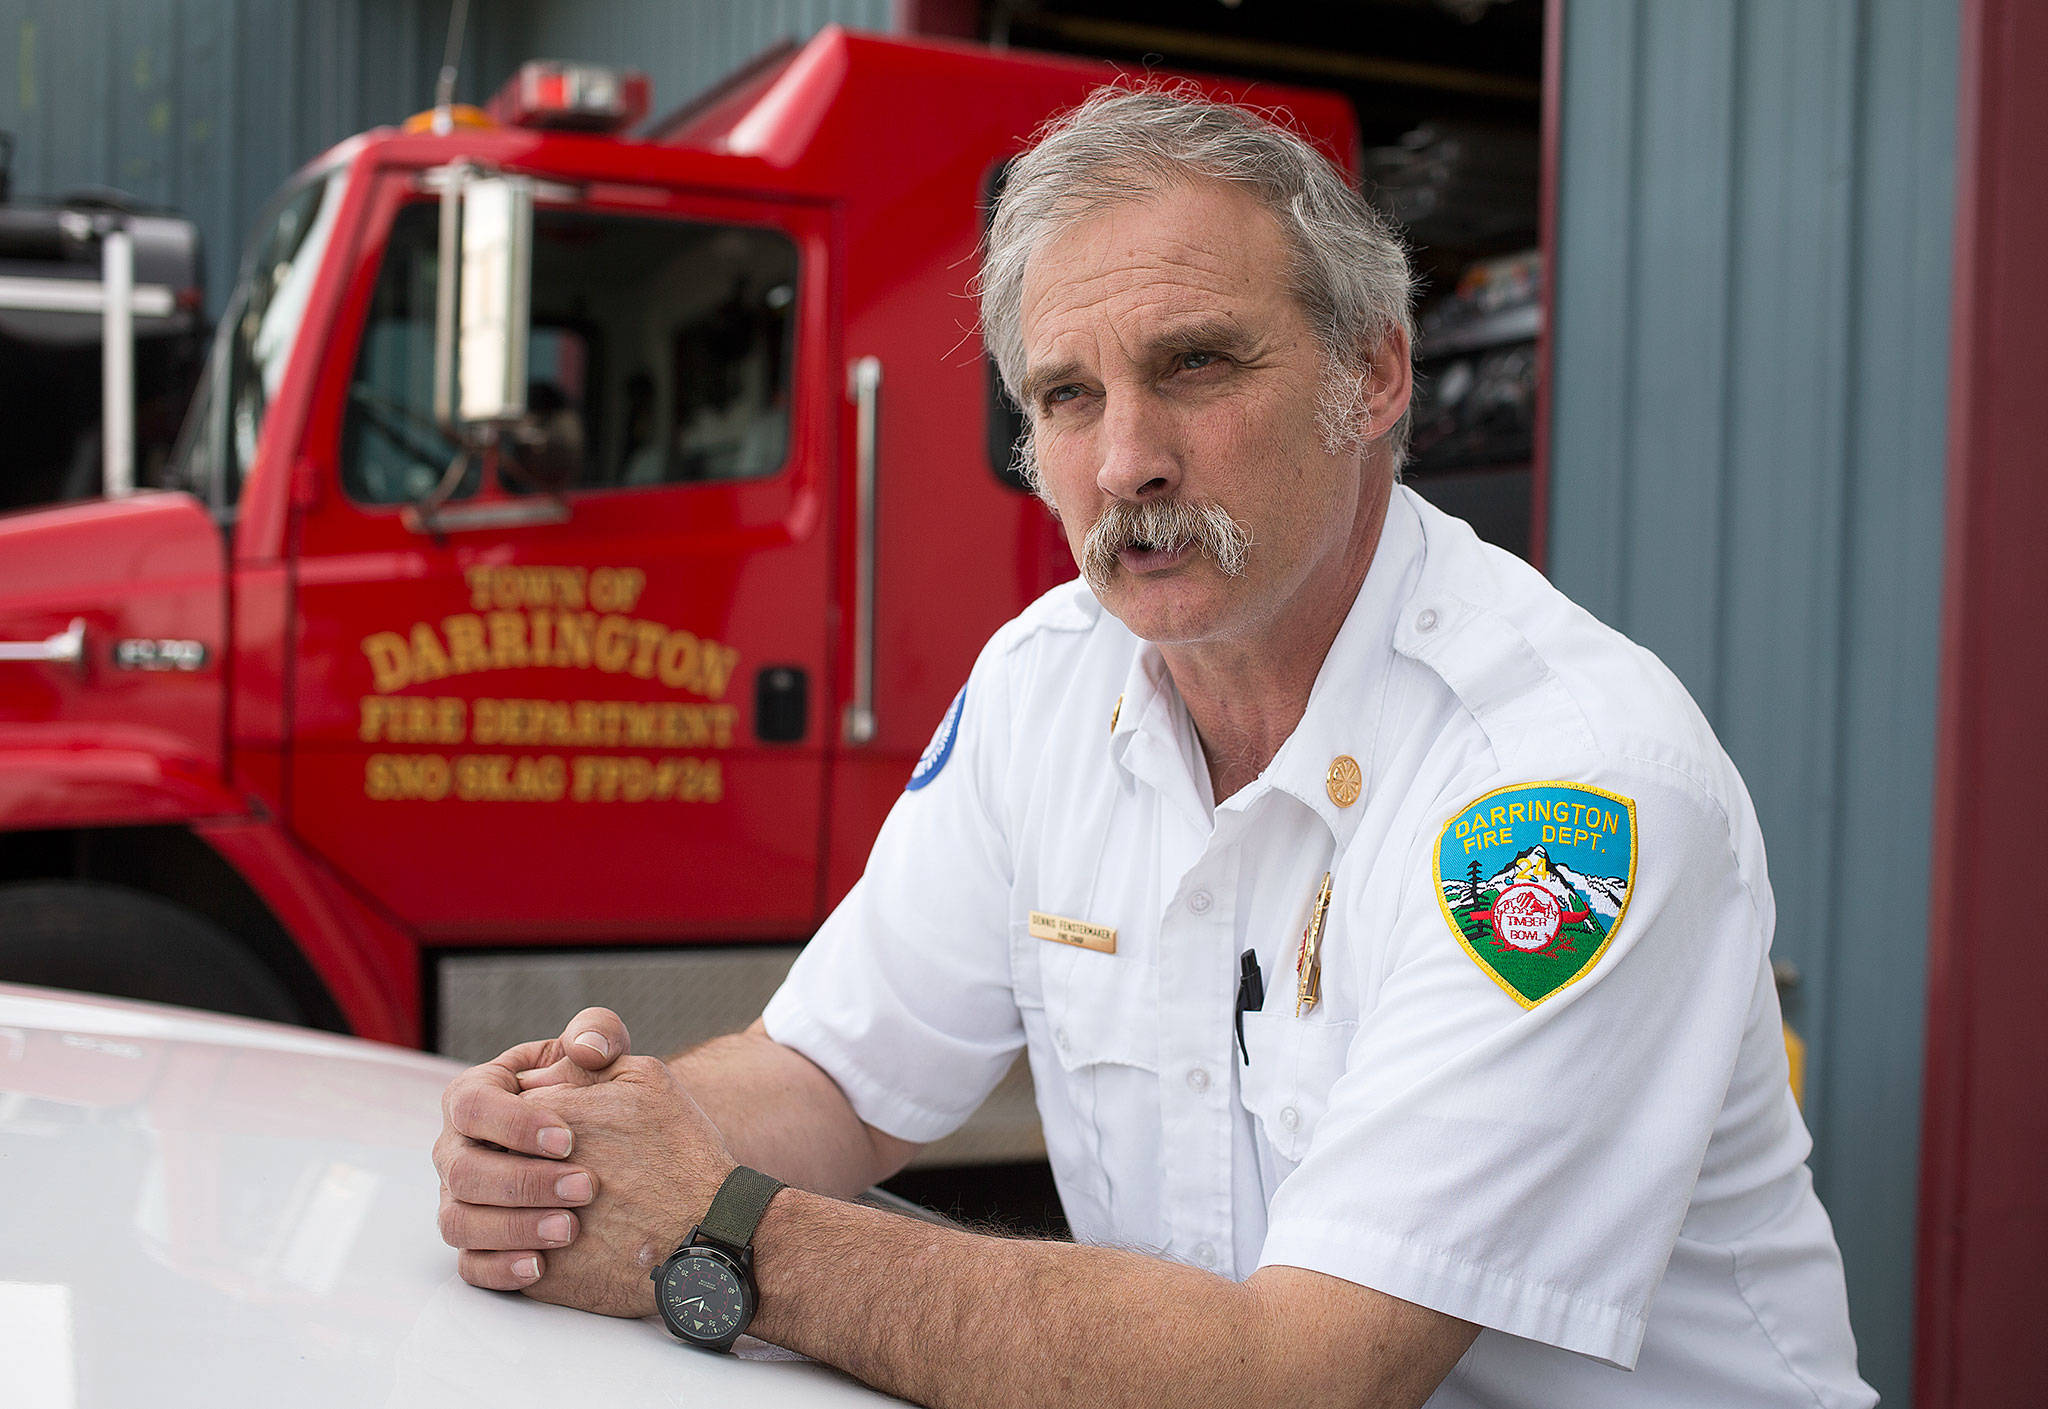 Most of the volunteers at the Darrington Fire Department have jobs out of town, Chief Denny Fenstermaker says. During a highway closure, they might decide to stay away — leaving fewer crew members in Darrington, should there be a fire. (Andy Bronson / The Herald)